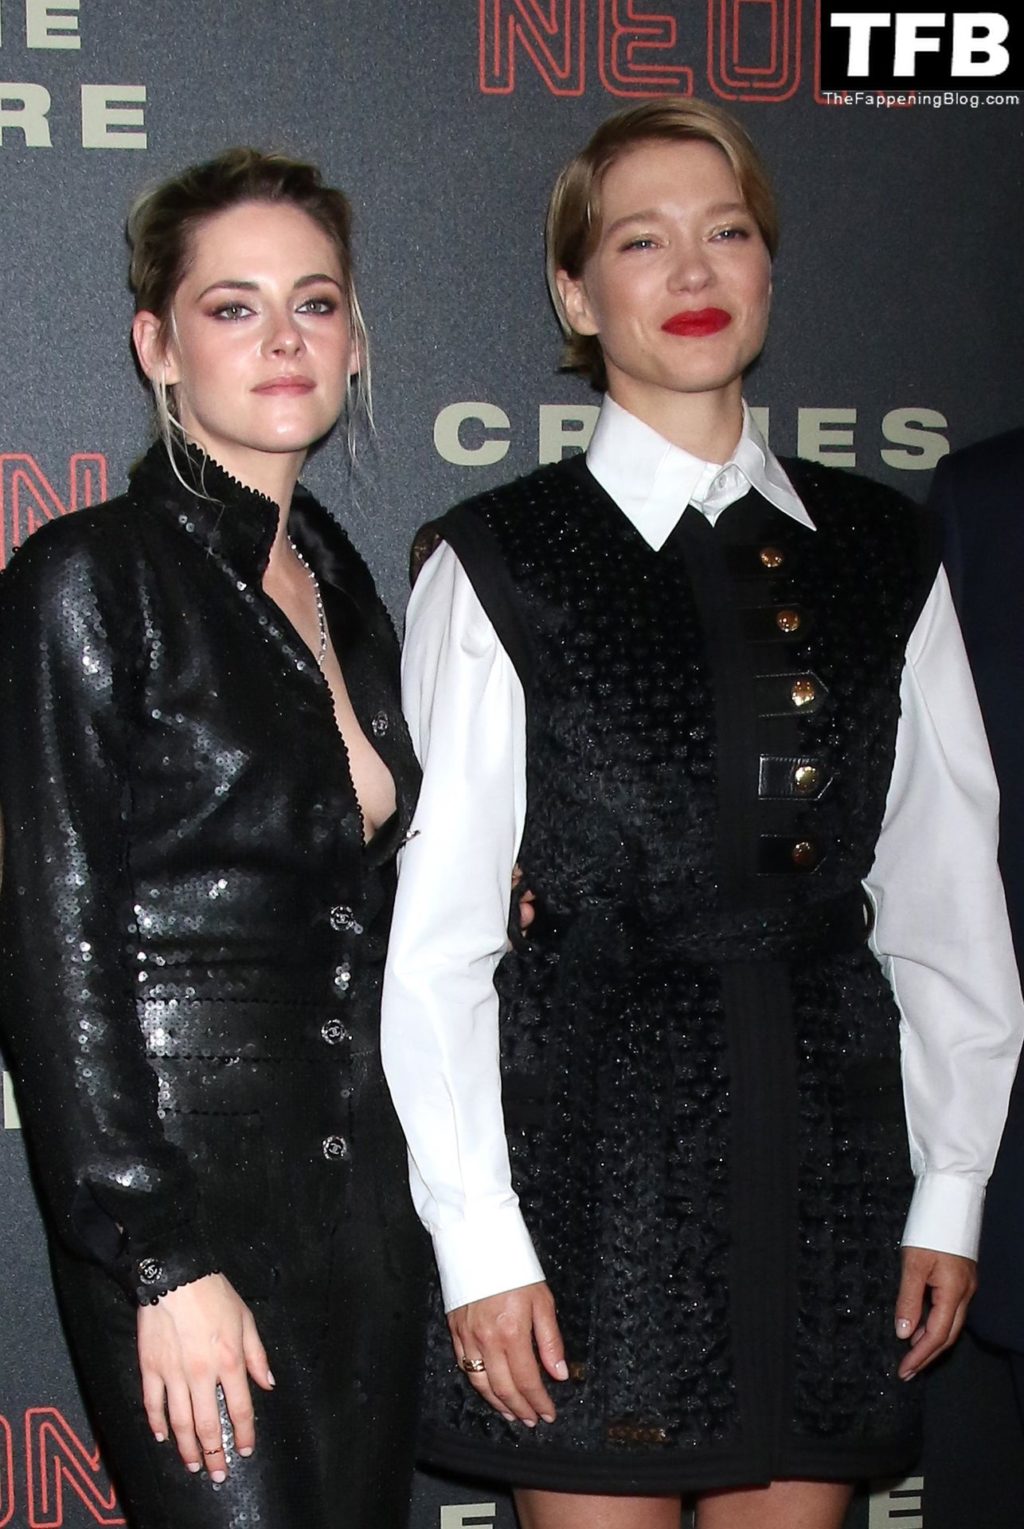 Kristen Stewart Looks Hot at the Premiere of ‘Crimes Of The Future’ in NY (113 Photos)